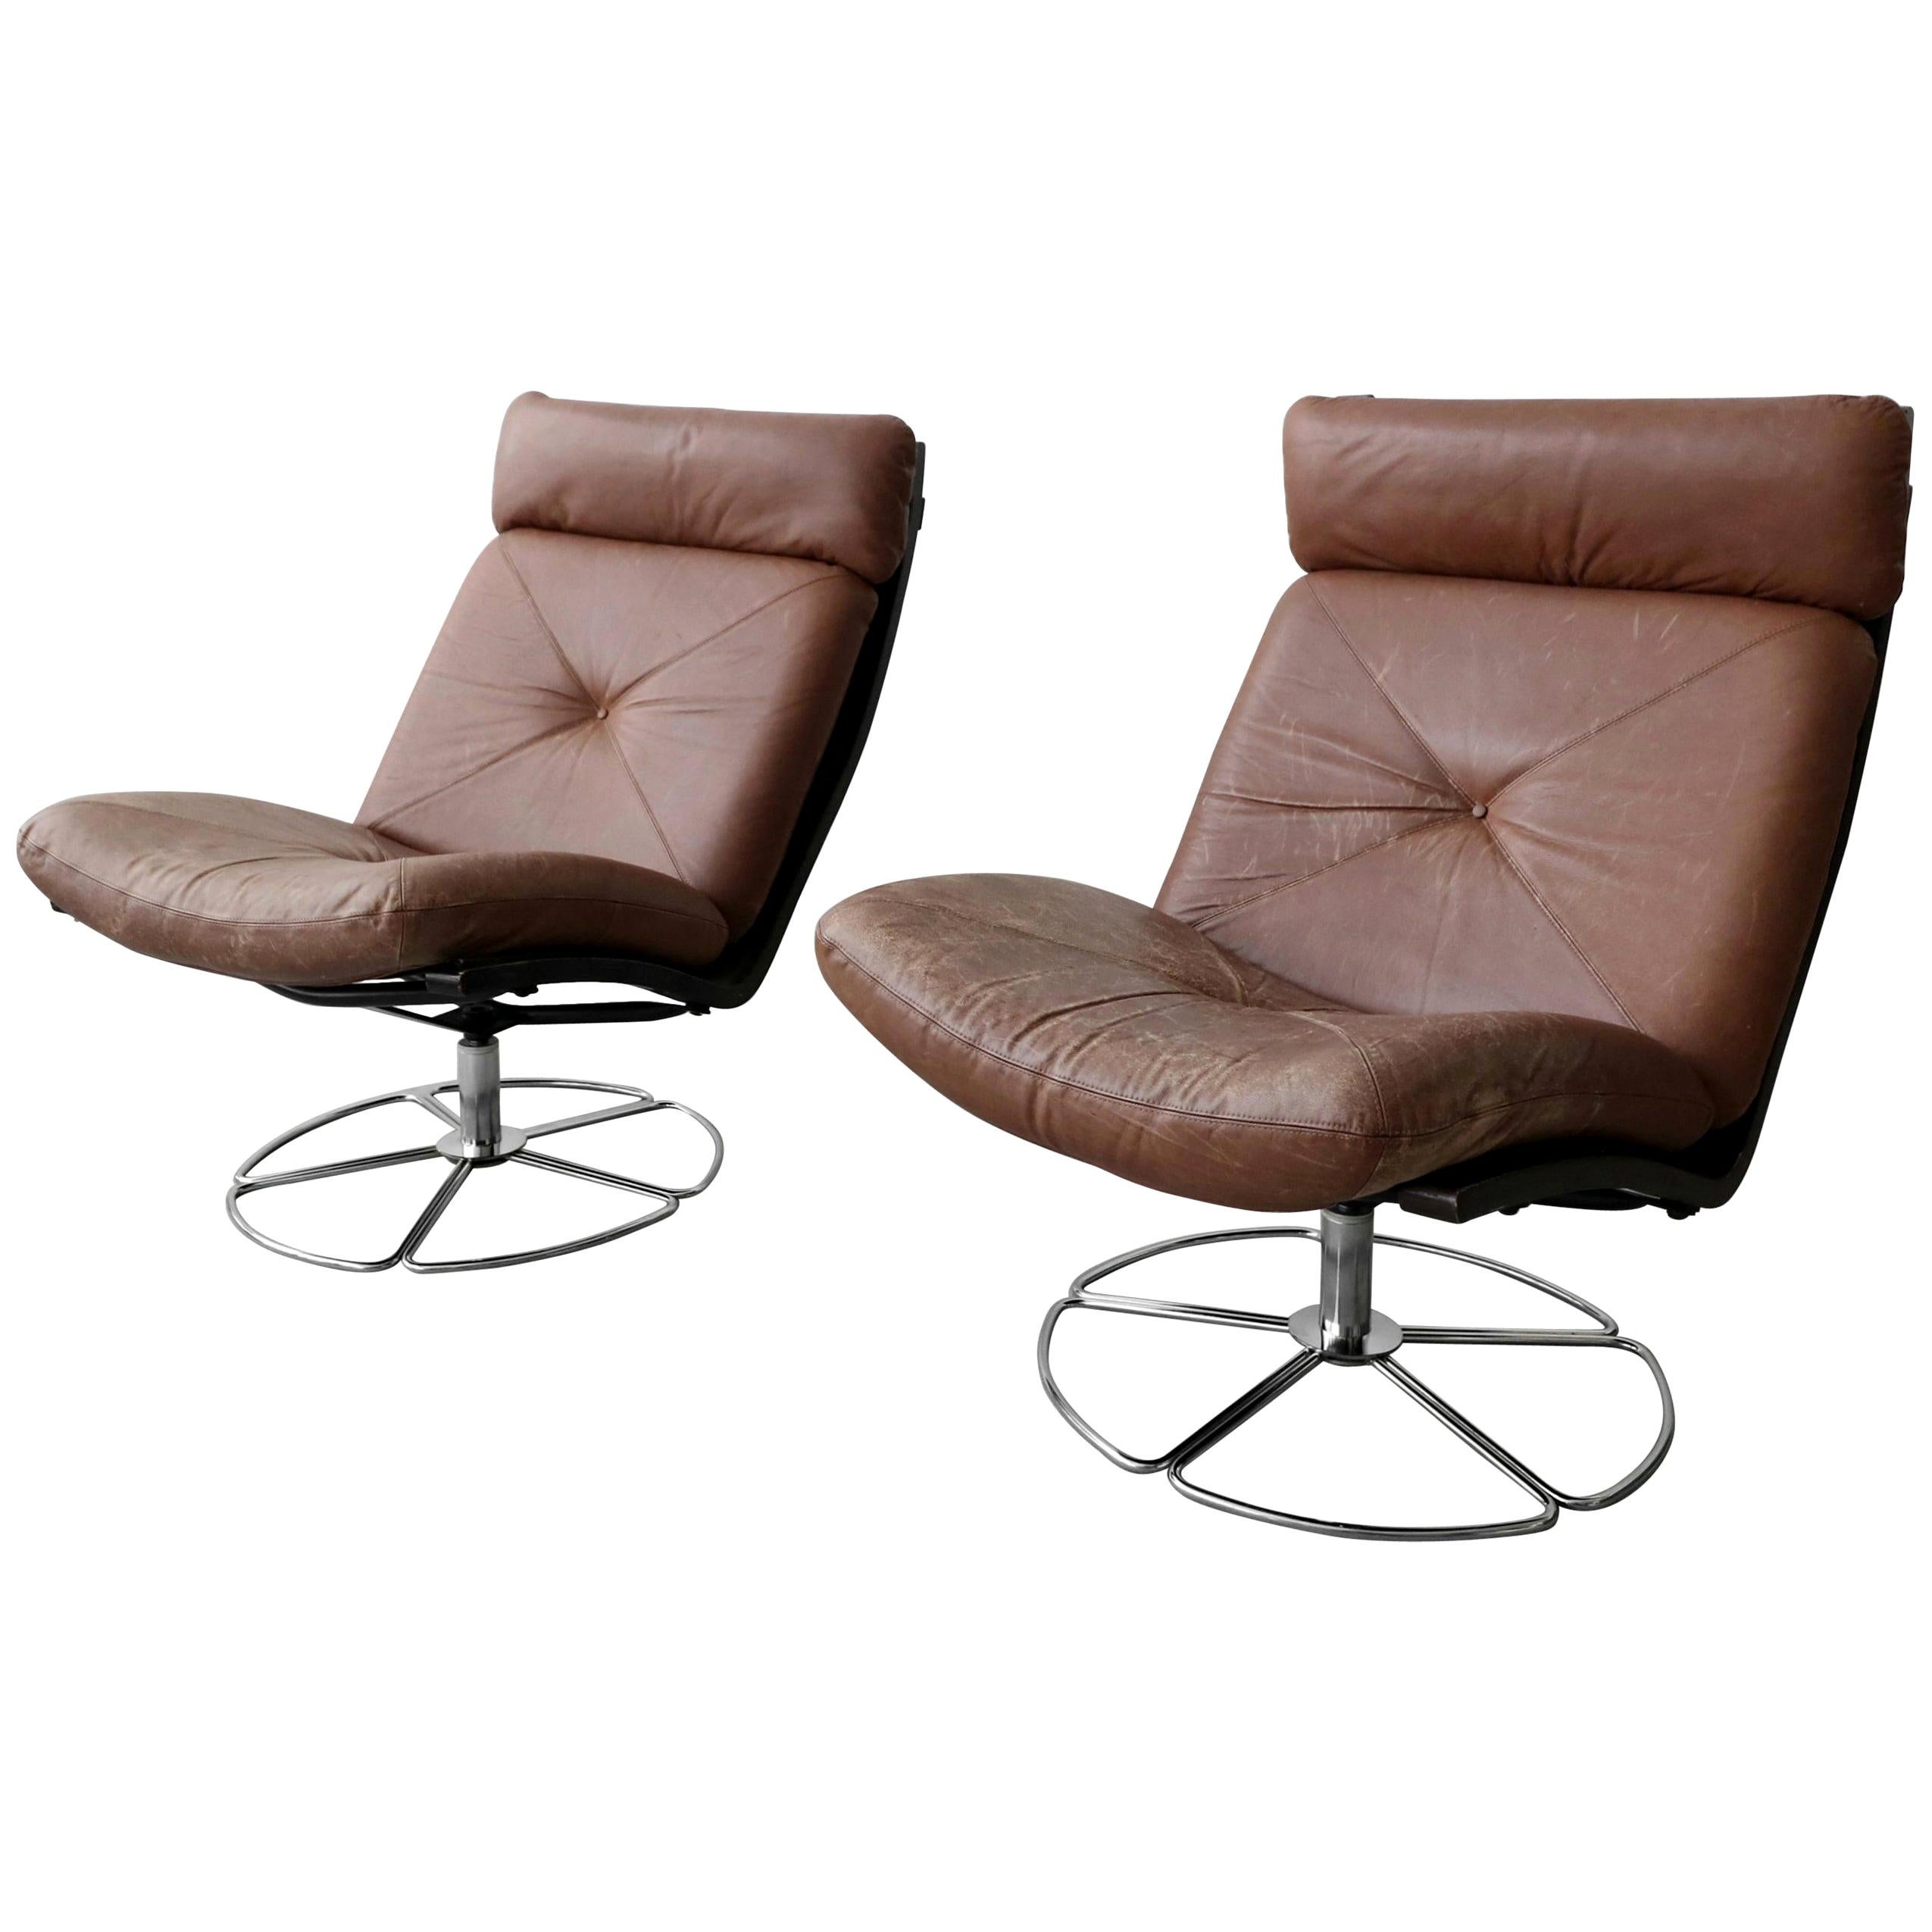 Pair of Midcentury Leather and Chrome Swivel Lounge Chairs